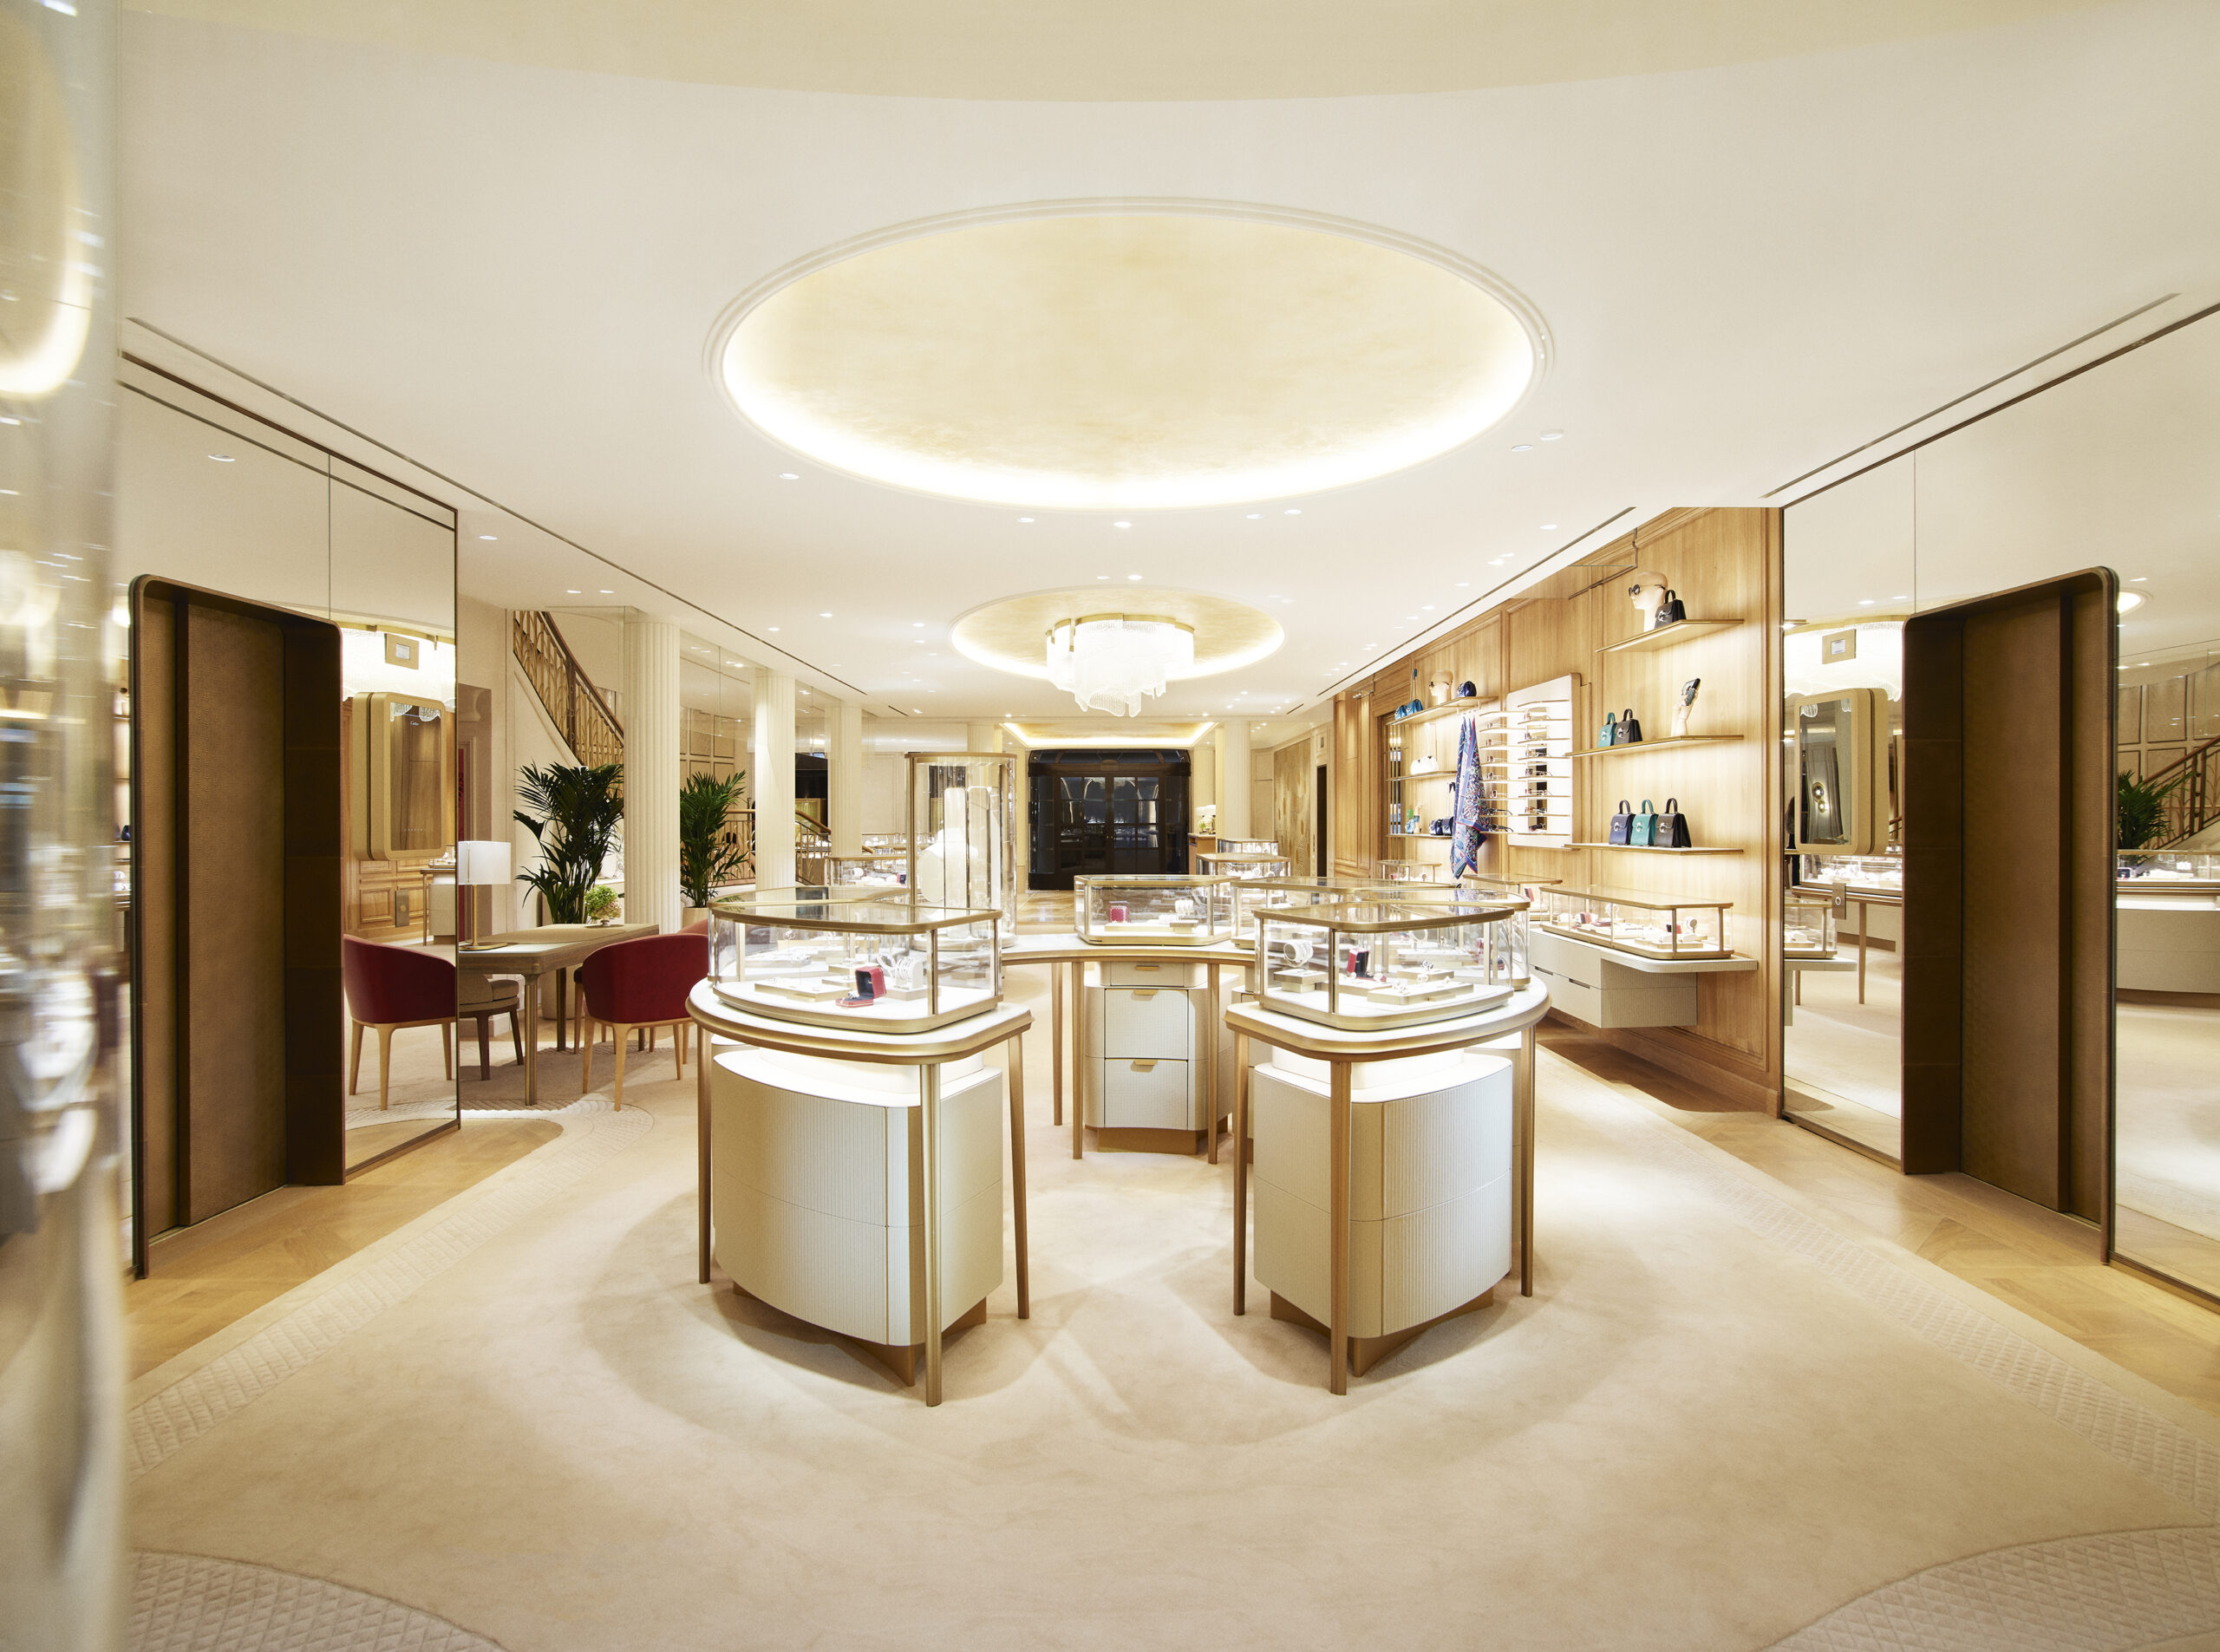 Greatest showrooms cartier paris 8 scaled